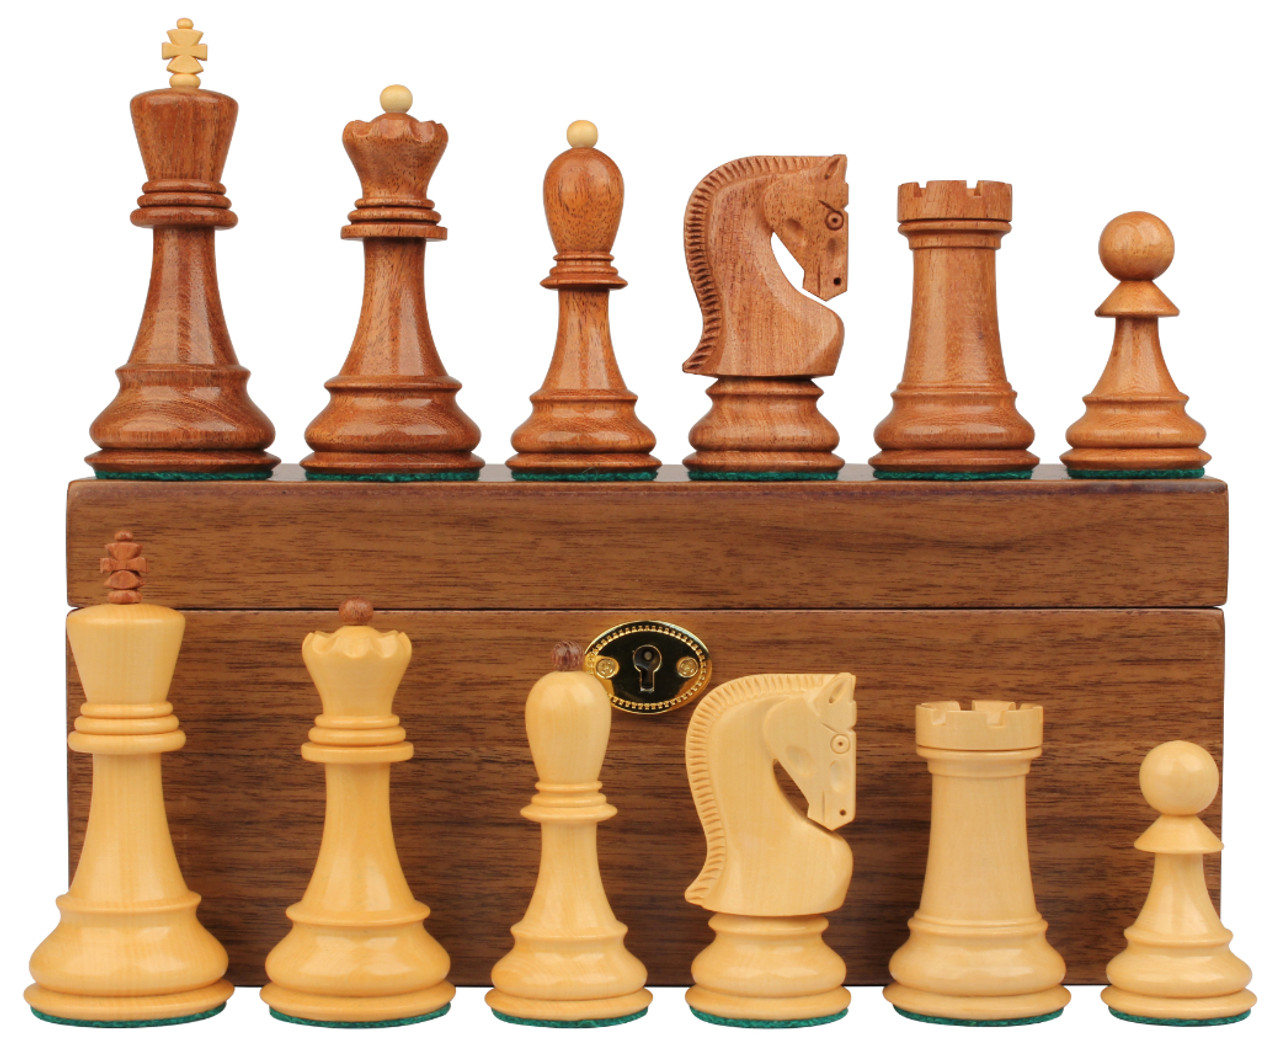 The Golden Collector Series Luxury Wood Chess Set, Box, & Board Combination